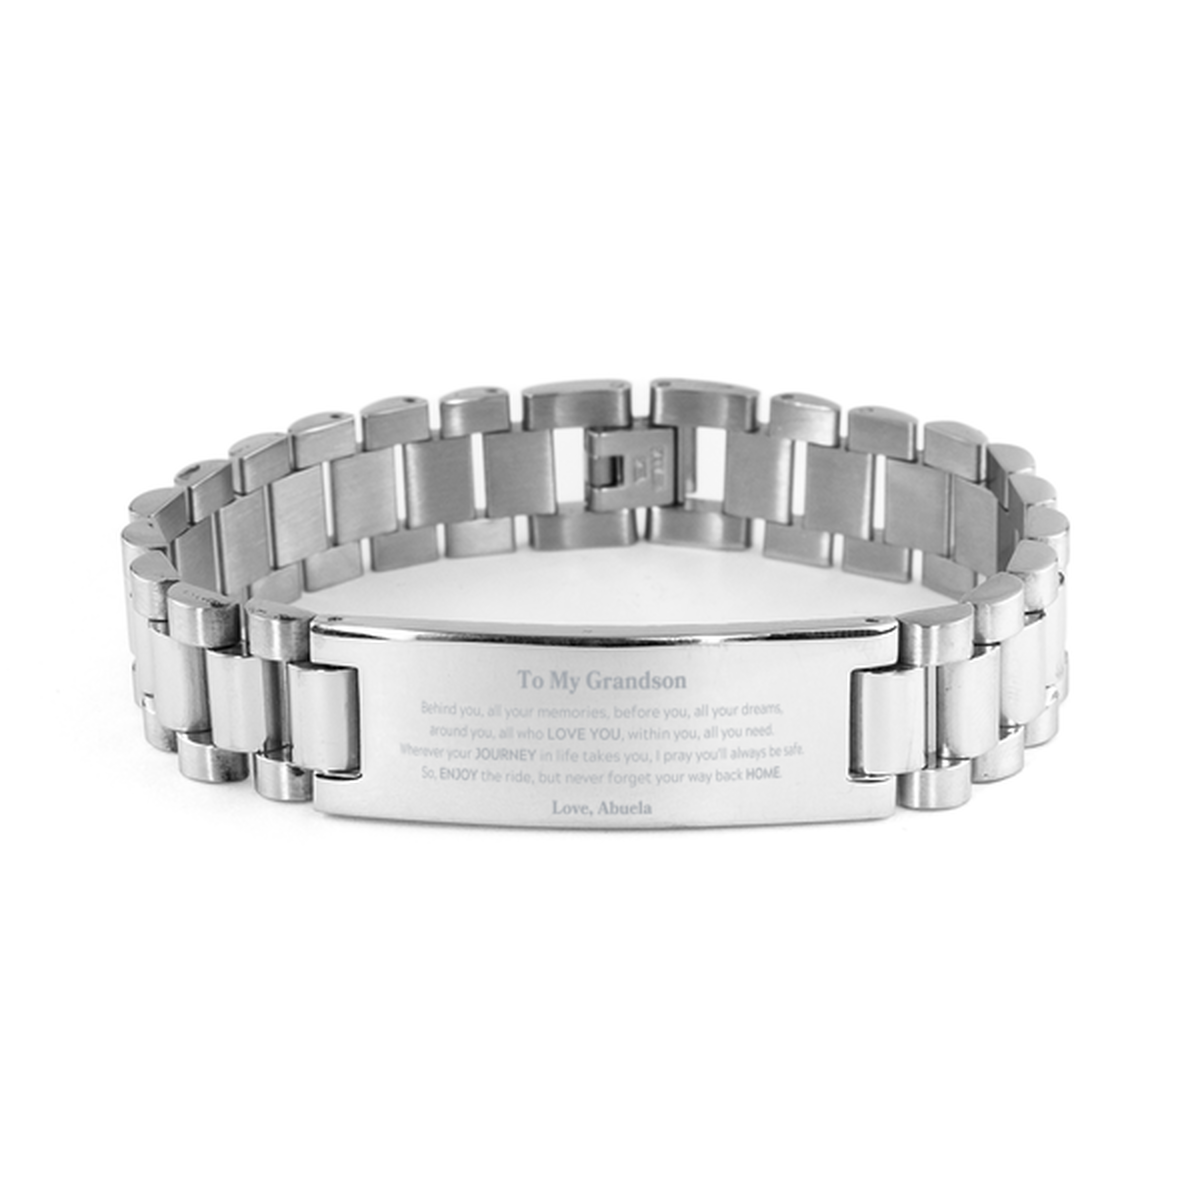 To My Grandson Graduation Gifts from Abuela, Grandson Ladder Stainless Steel Bracelet Christmas Birthday Gifts for Grandson Behind you, all your memories, before you, all your dreams. Love, Abuela